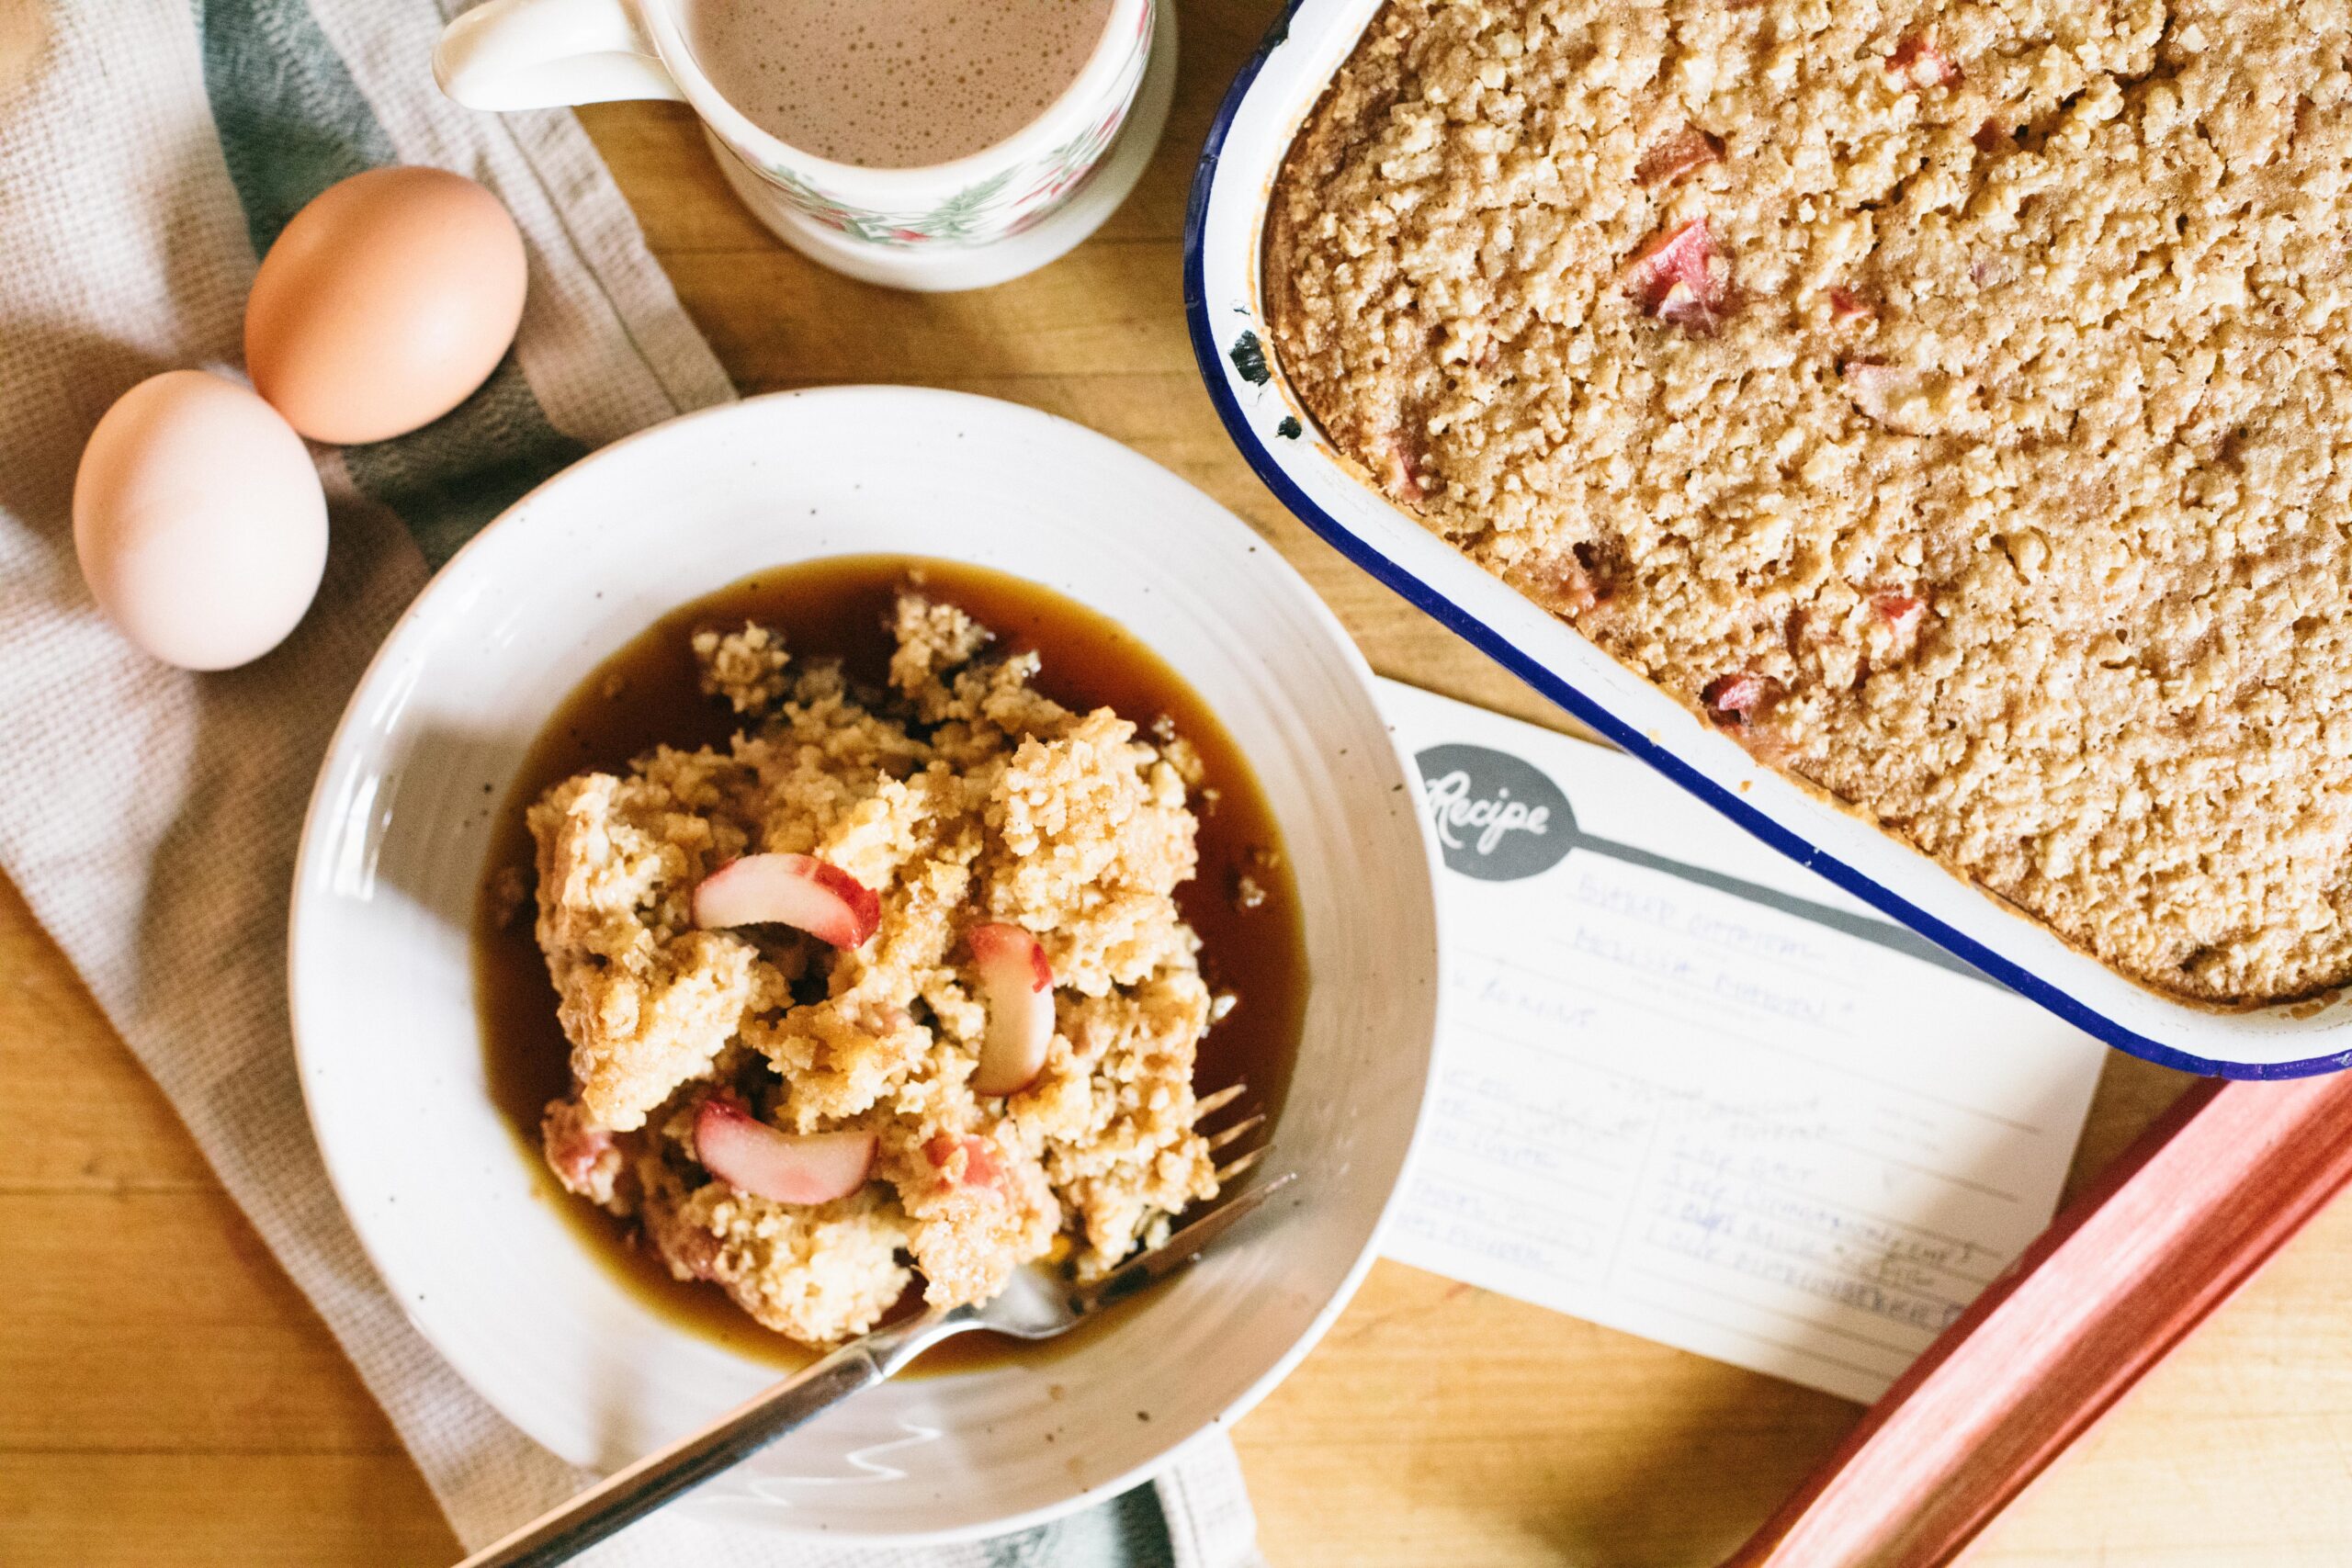 Photo of a bowl of Sourdough Rhubarb Baked Oatmeal with eggs, hot cocoa and rhubarb with a recipe card